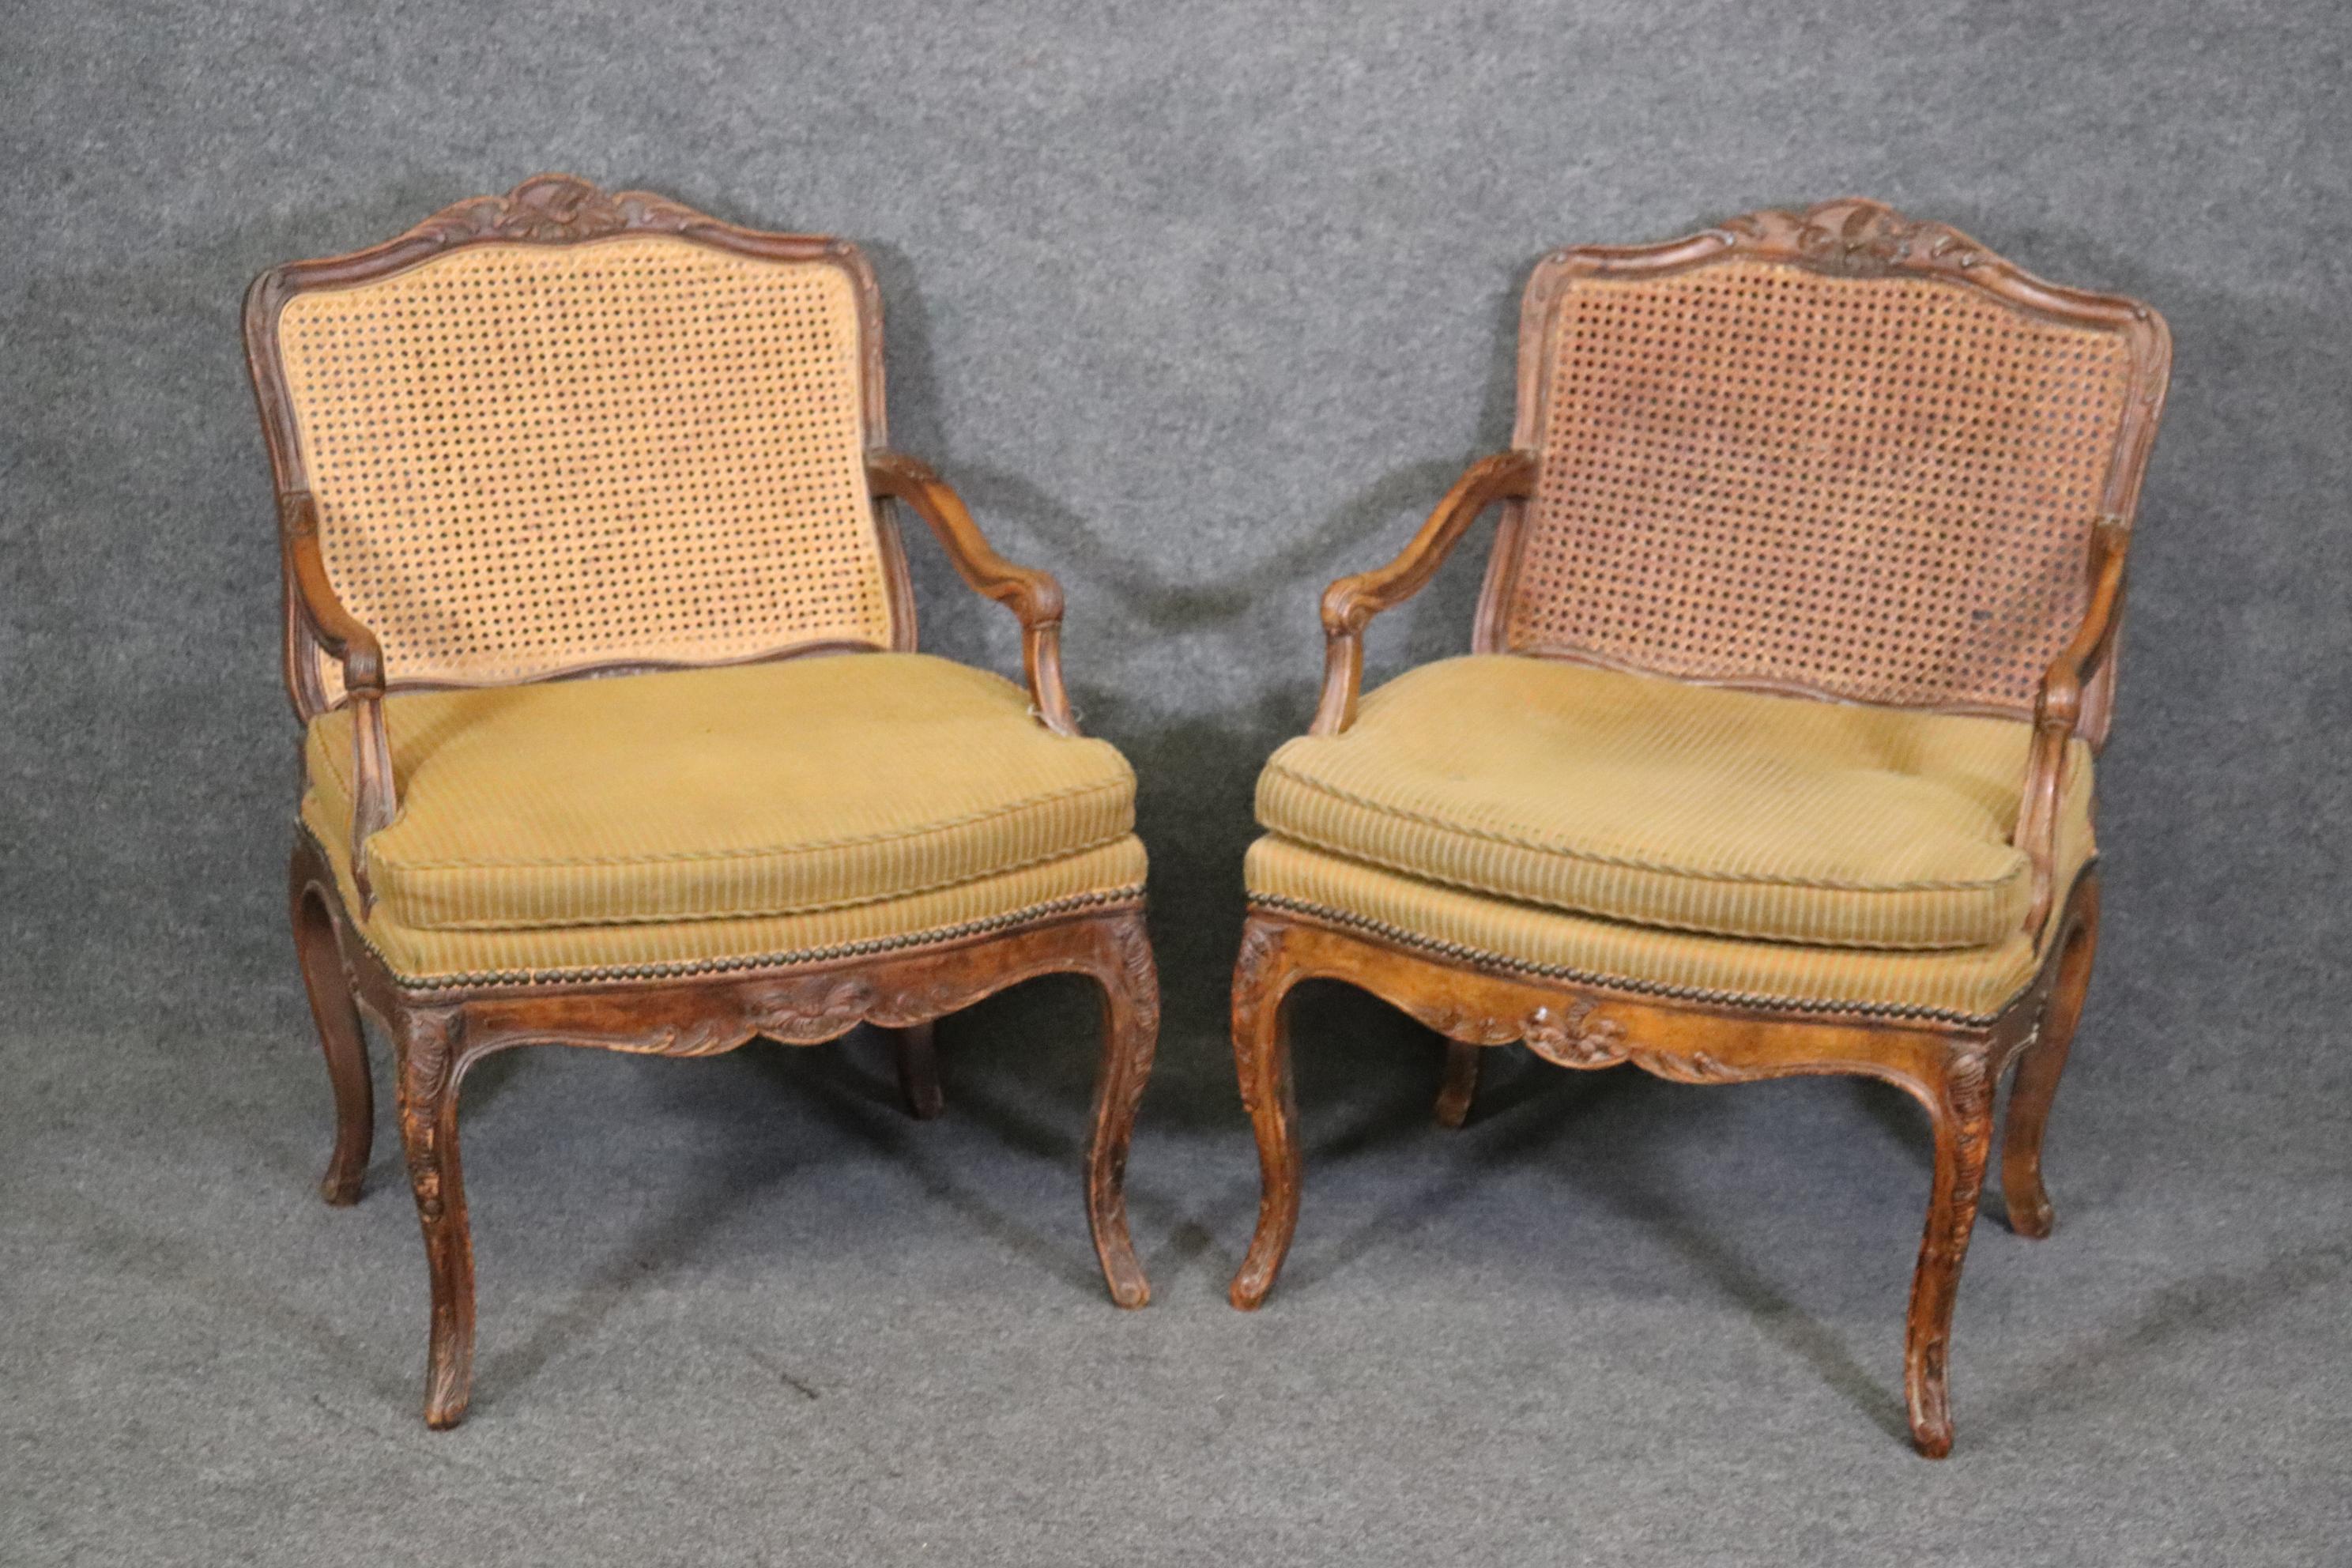 These are nice chairs. They have some minor loss to cane. The frames are carved walnut in the Louis XV style. Buttons missing on the upholstery. The chairs measure 33.75 tall x 24.5 wide x 27.25 deep and seat height is 18. They date to the 1940s. 